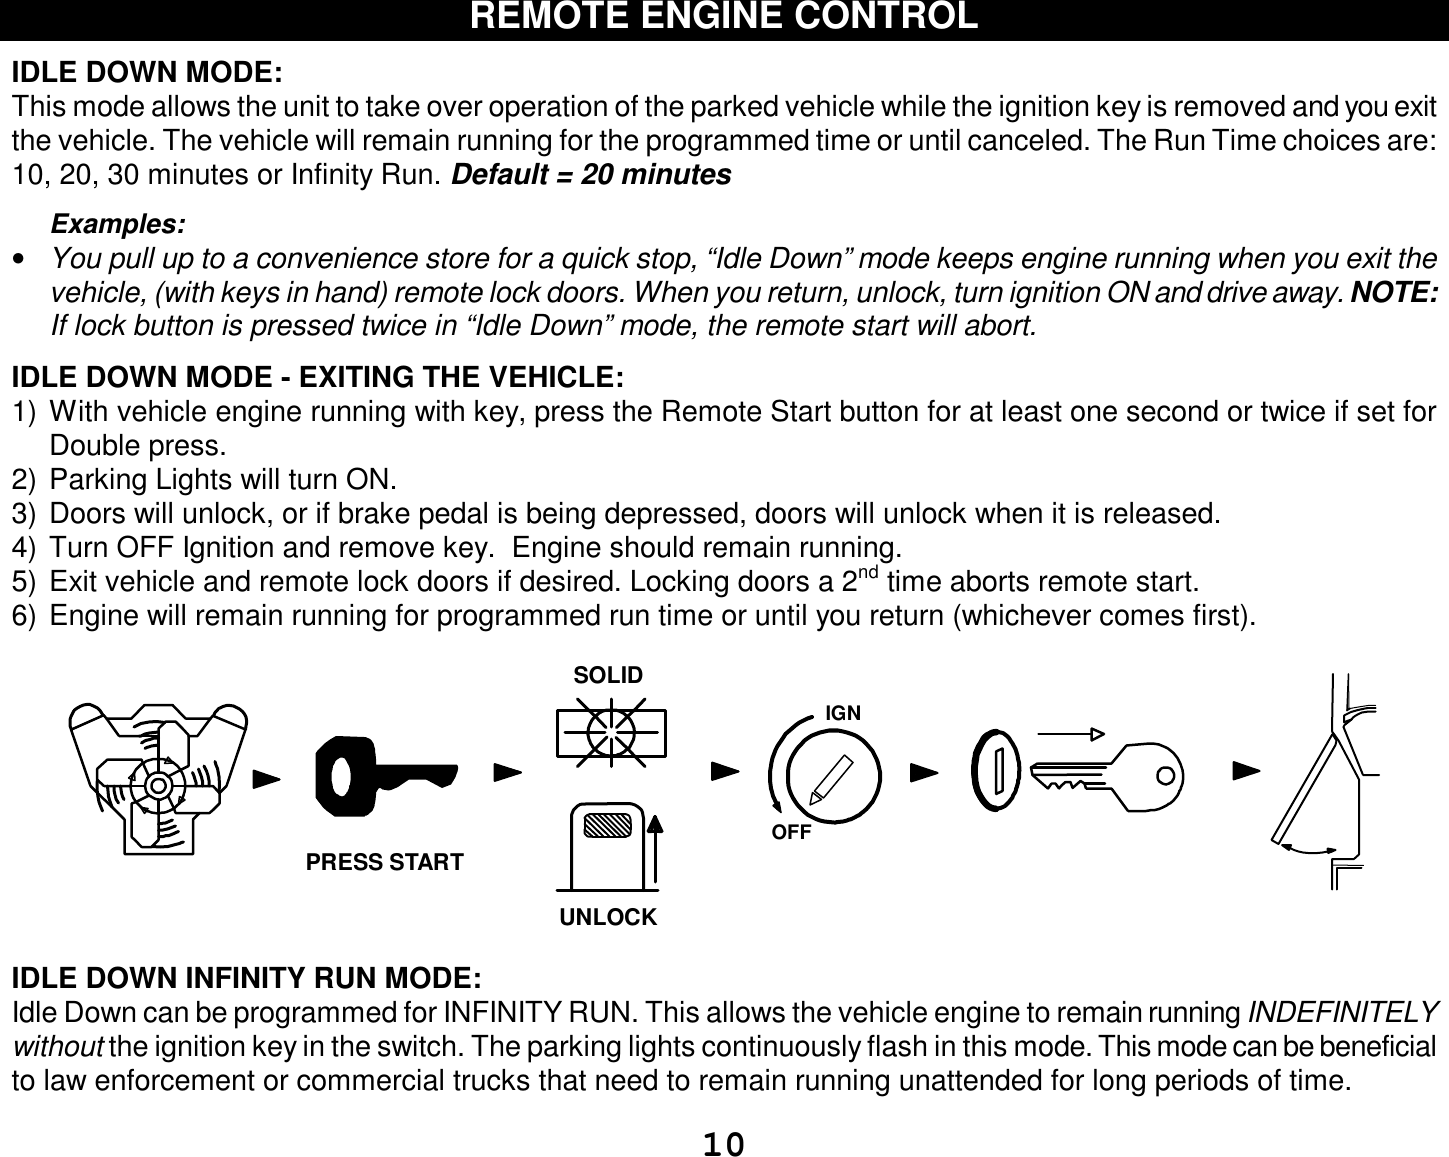  10 REMOTE ENGINE CONTROL  IDLE DOWN MODE: This mode allows the unit to take over operation of the parked vehicle while the ignition key is removed and you exit the vehicle. The vehicle will remain running for the programmed time or until canceled. The Run Time choices are: 10, 20, 30 minutes or Infinity Run. Default = 20 minutes  Examples: • You pull up to a convenience store for a quick stop, “Idle Down” mode keeps engine running when you exit the vehicle, (with keys in hand) remote lock doors. When you return, unlock, turn ignition ON and drive away. NOTE: If lock button is pressed twice in “Idle Down” mode, the remote start will abort.  IDLE DOWN MODE - EXITING THE VEHICLE: 1) With vehicle engine running with key, press the Remote Start button for at least one second or twice if set for Double press. 2) Parking Lights will turn ON. 3) Doors will unlock, or if brake pedal is being depressed, doors will unlock when it is released. 4) Turn OFF Ignition and remove key.  Engine should remain running. 5) Exit vehicle and remote lock doors if desired. Locking doors a 2nd time aborts remote start. 6) Engine will remain running for programmed run time or until you return (whichever comes first). IGNSOLIDOFFUNLOCKPRESS START IDLE DOWN INFINITY RUN MODE:  Idle Down can be programmed for INFINITY RUN. This allows the vehicle engine to remain running INDEFINITELY without the ignition key in the switch. The parking lights continuously flash in this mode. This mode can be beneficial to law enforcement or commercial trucks that need to remain running unattended for long periods of time. 